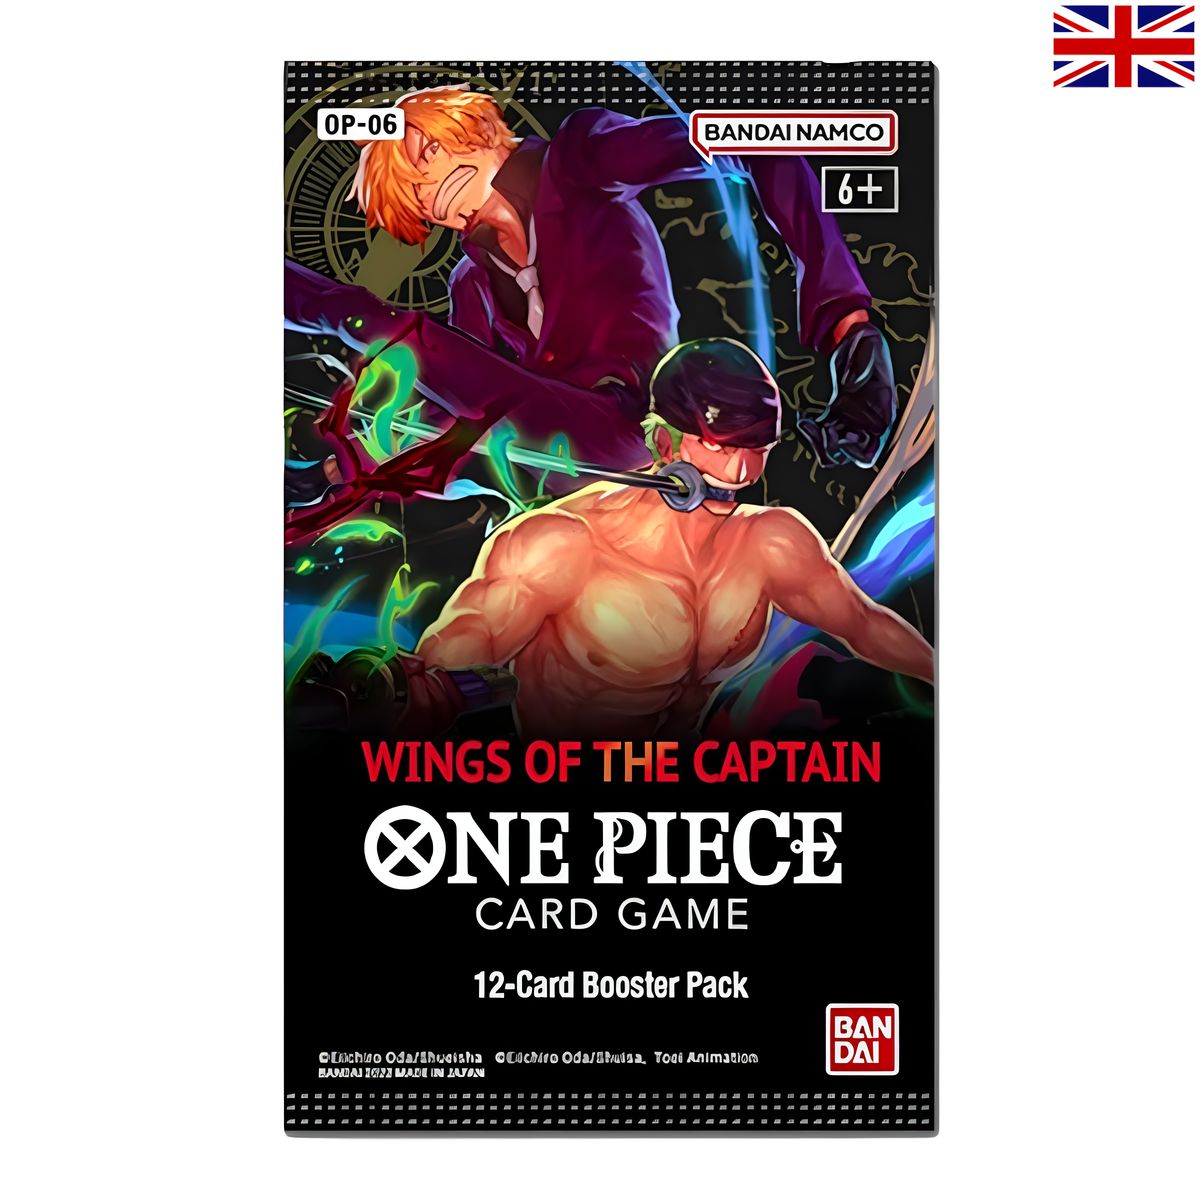 One Piece - Wings of the Captain OP-06 Booster Englisch